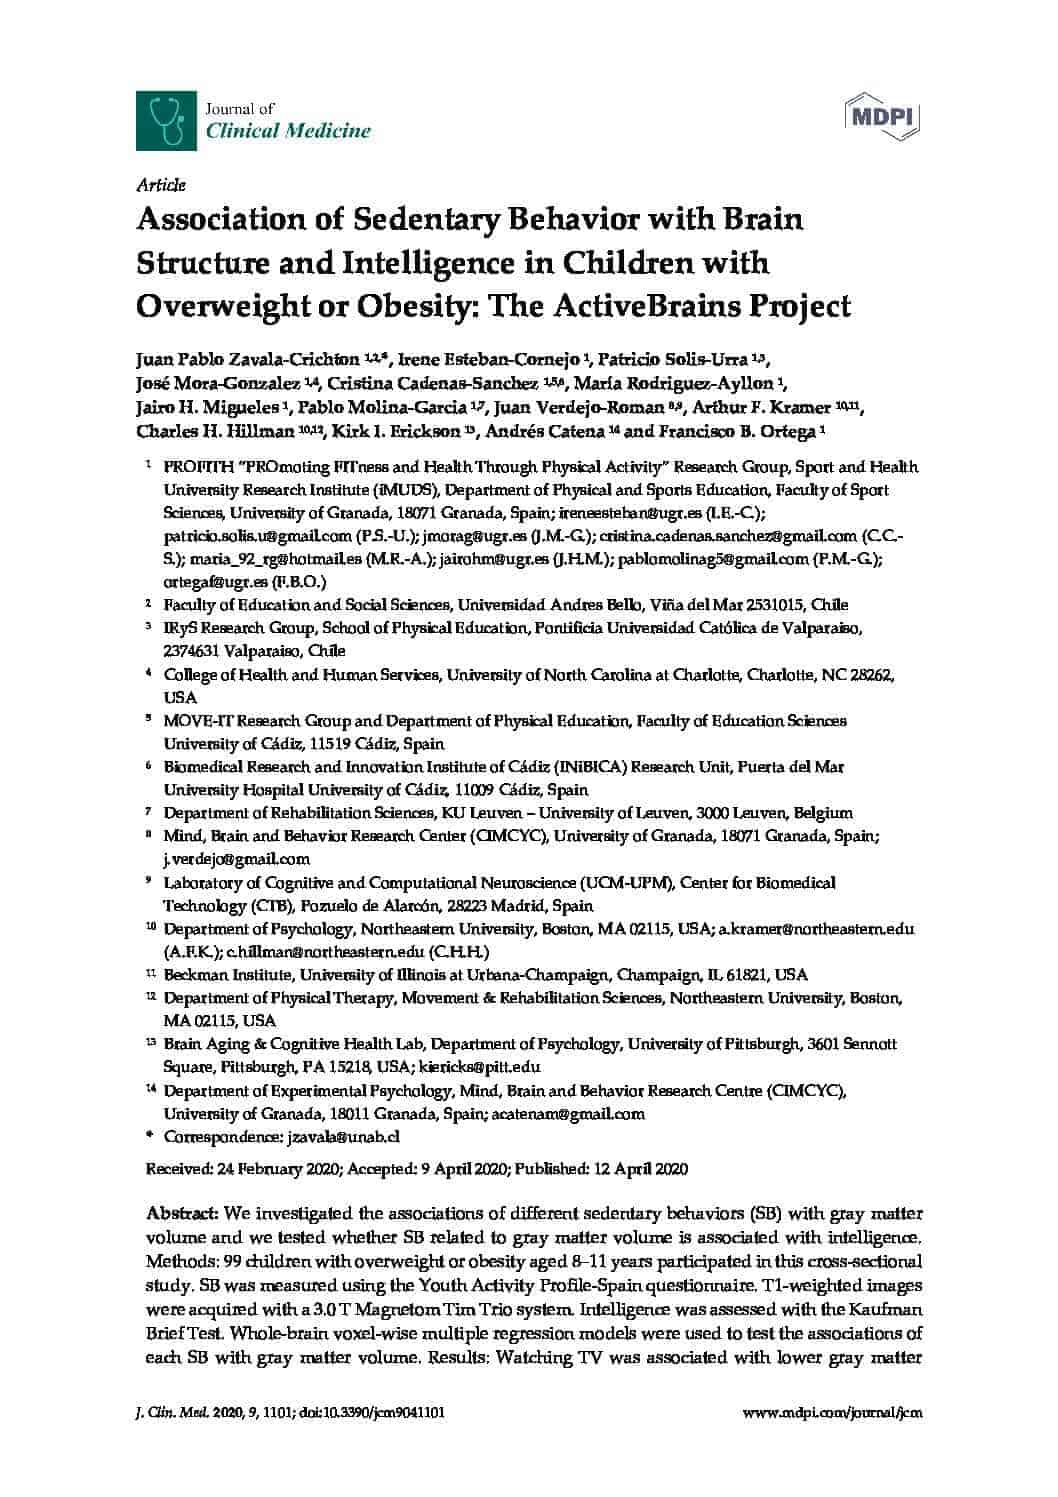 The ActiveBrains Project – Association of Sedentary Behaviour with Brain Structure and Intelligence in Children with Overweight or Obesity